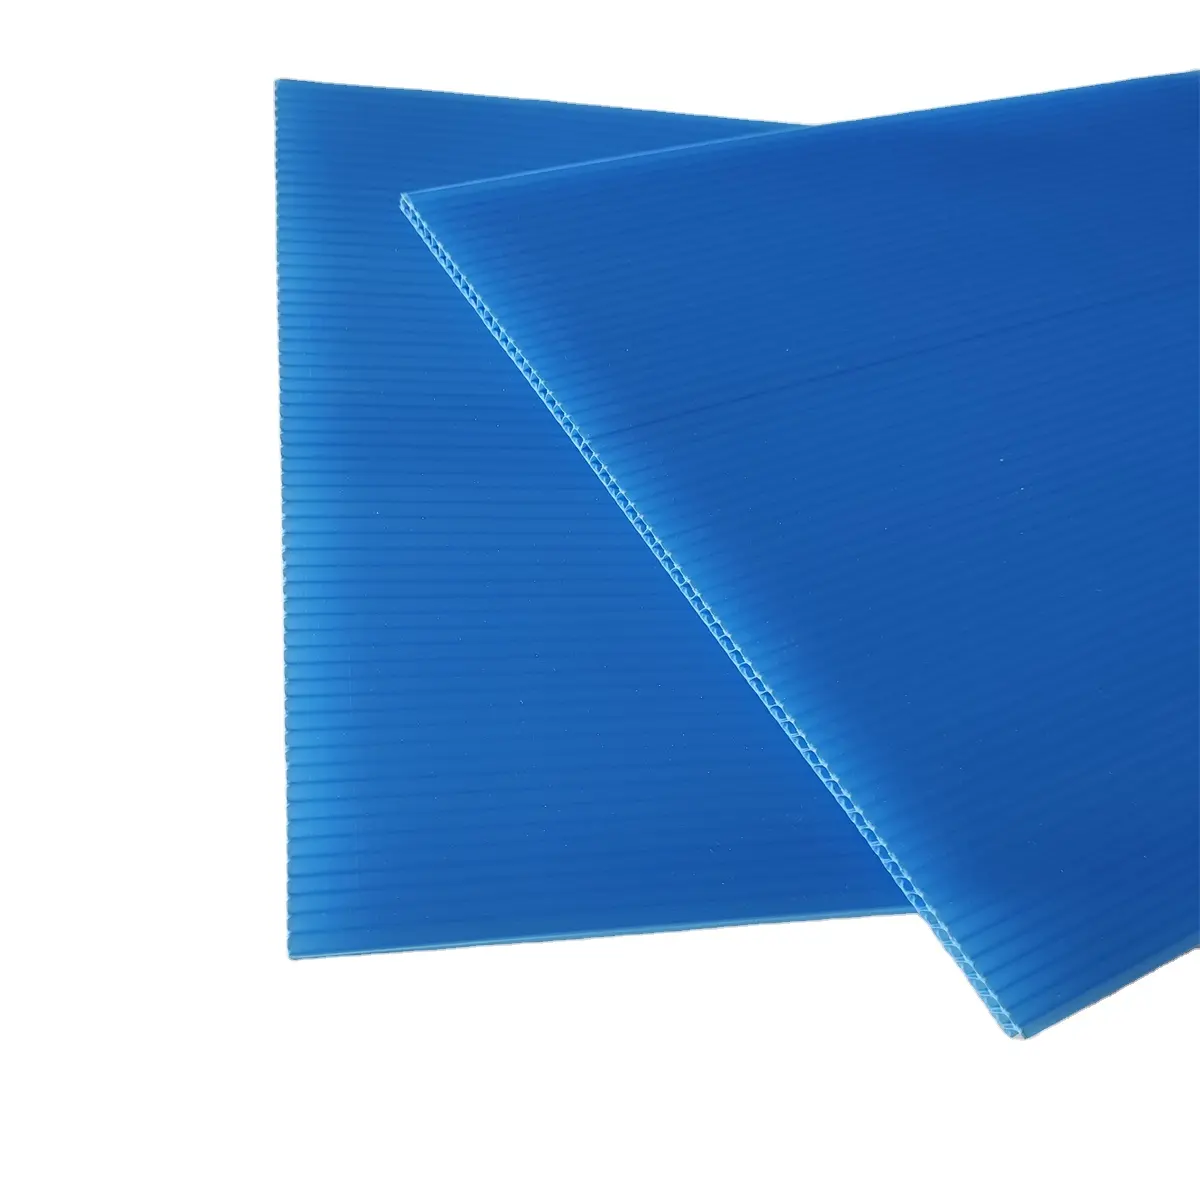 1800 Gsm Density 6mm Affordability Strong Polypropylene Corrugated Sheet for Industries Applications